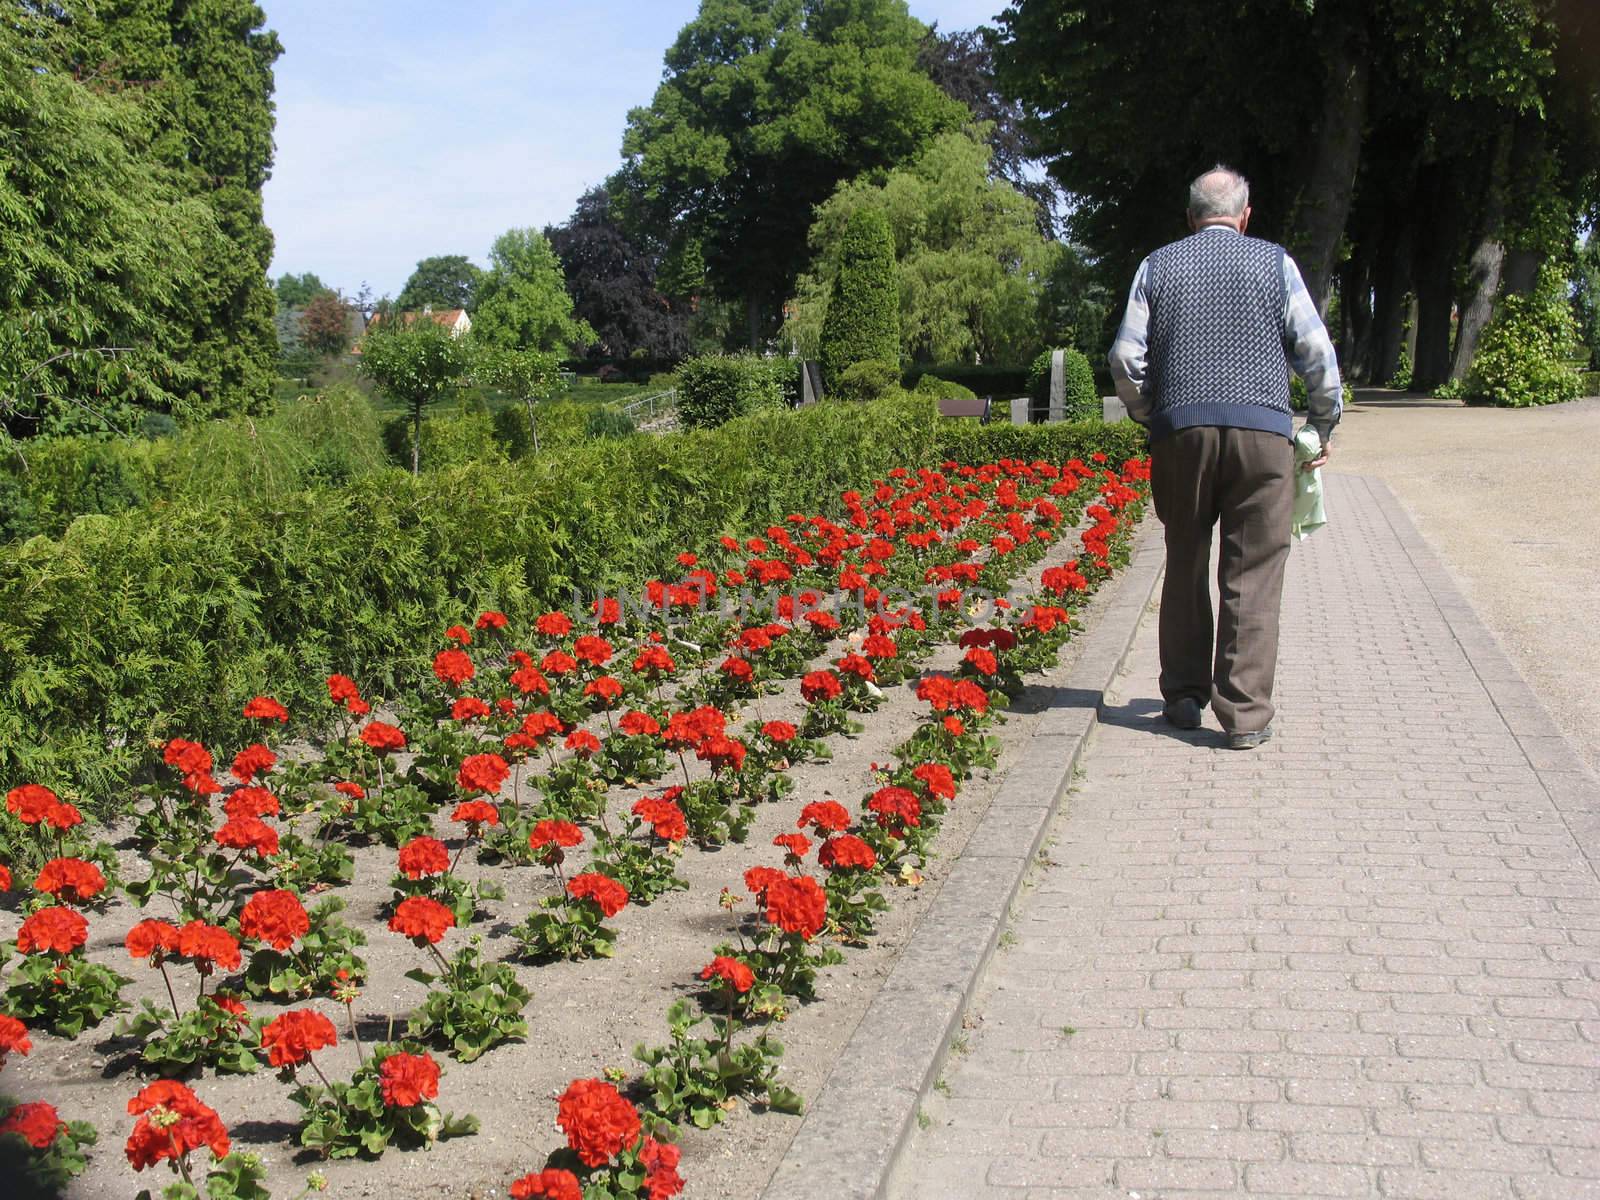 Elderly man on his way to his wifes grave at the cemetary at summertime with flowers in his hand.